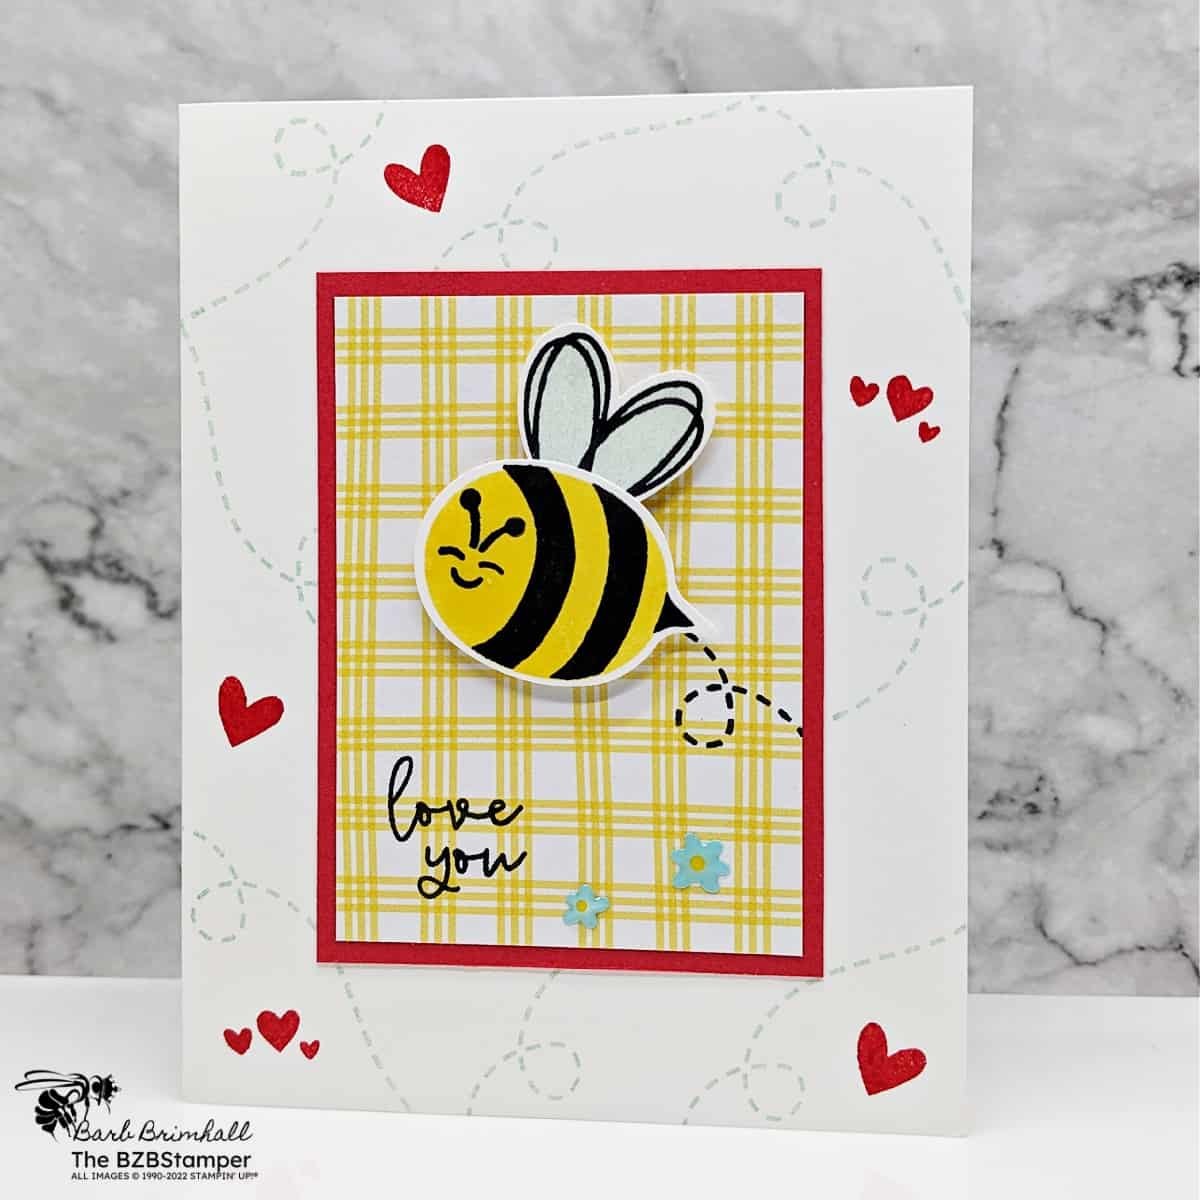 Bee My Valentine Bundle by Stampin Up featuring a bee that says "I love you" in red, blue and yellow with red hearts.